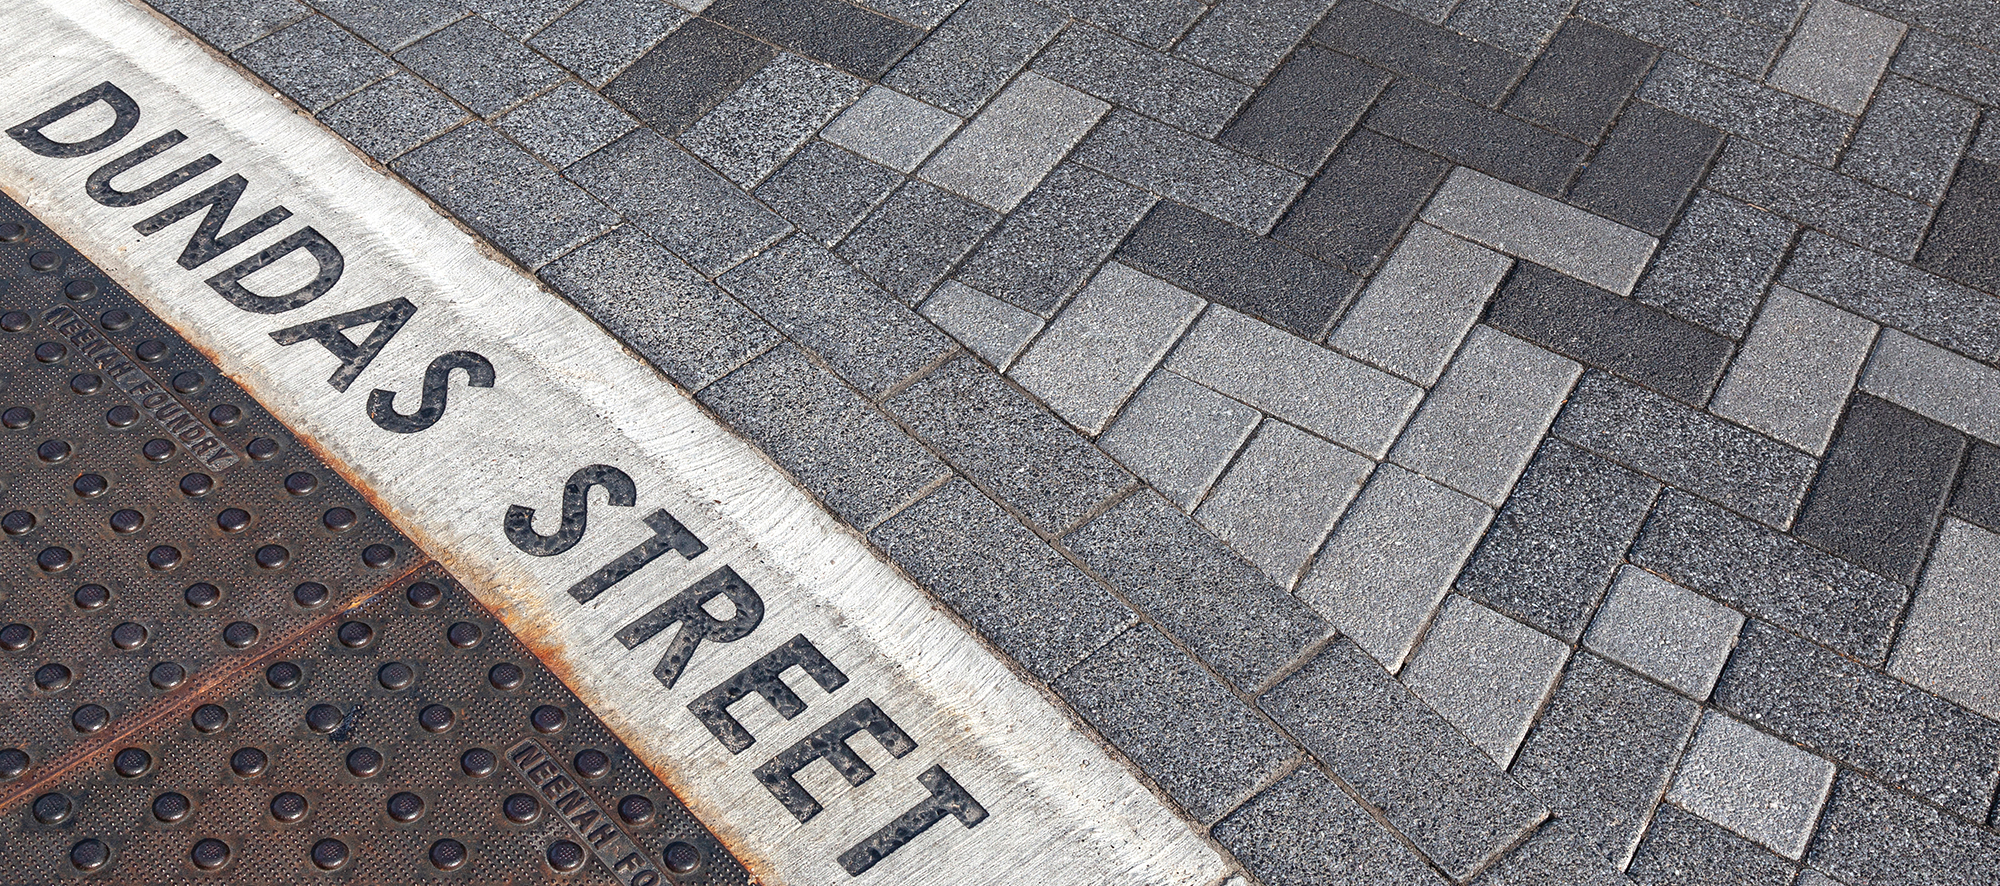 The Words "Dundas Street" are laid into a curb below Series pavers in alternating patterns and colors.